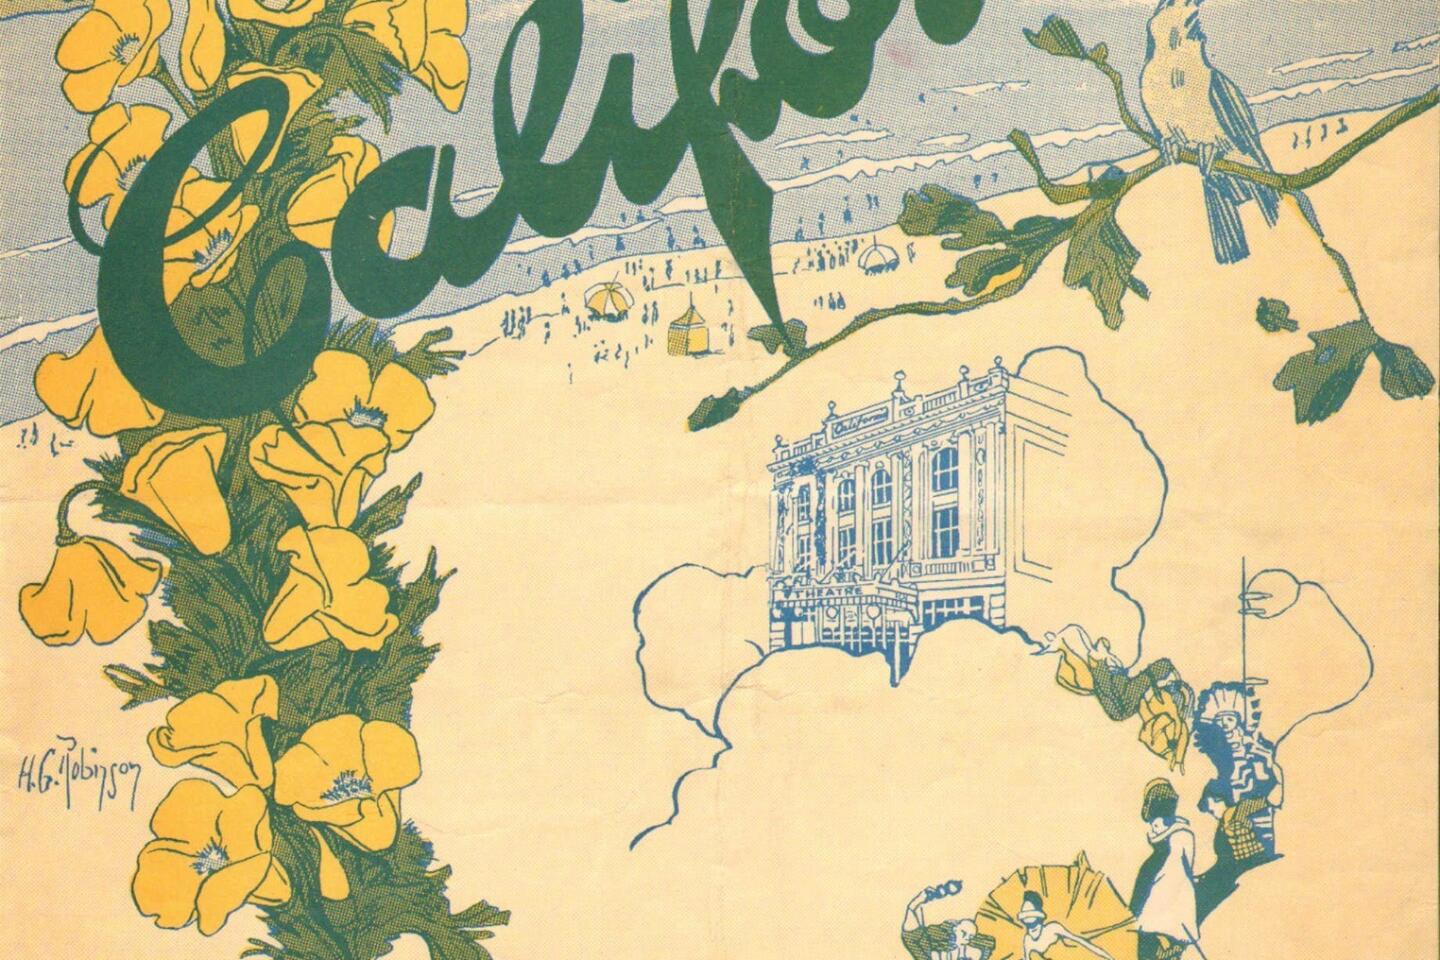 The cover for the 1918 sheet music "California," composed by Arthur Kay. The sheet music is part of the 2013 book, "Songs in the Key of Los Angeles: Sheet Music From the Collection of the Los Angeles Public Library."